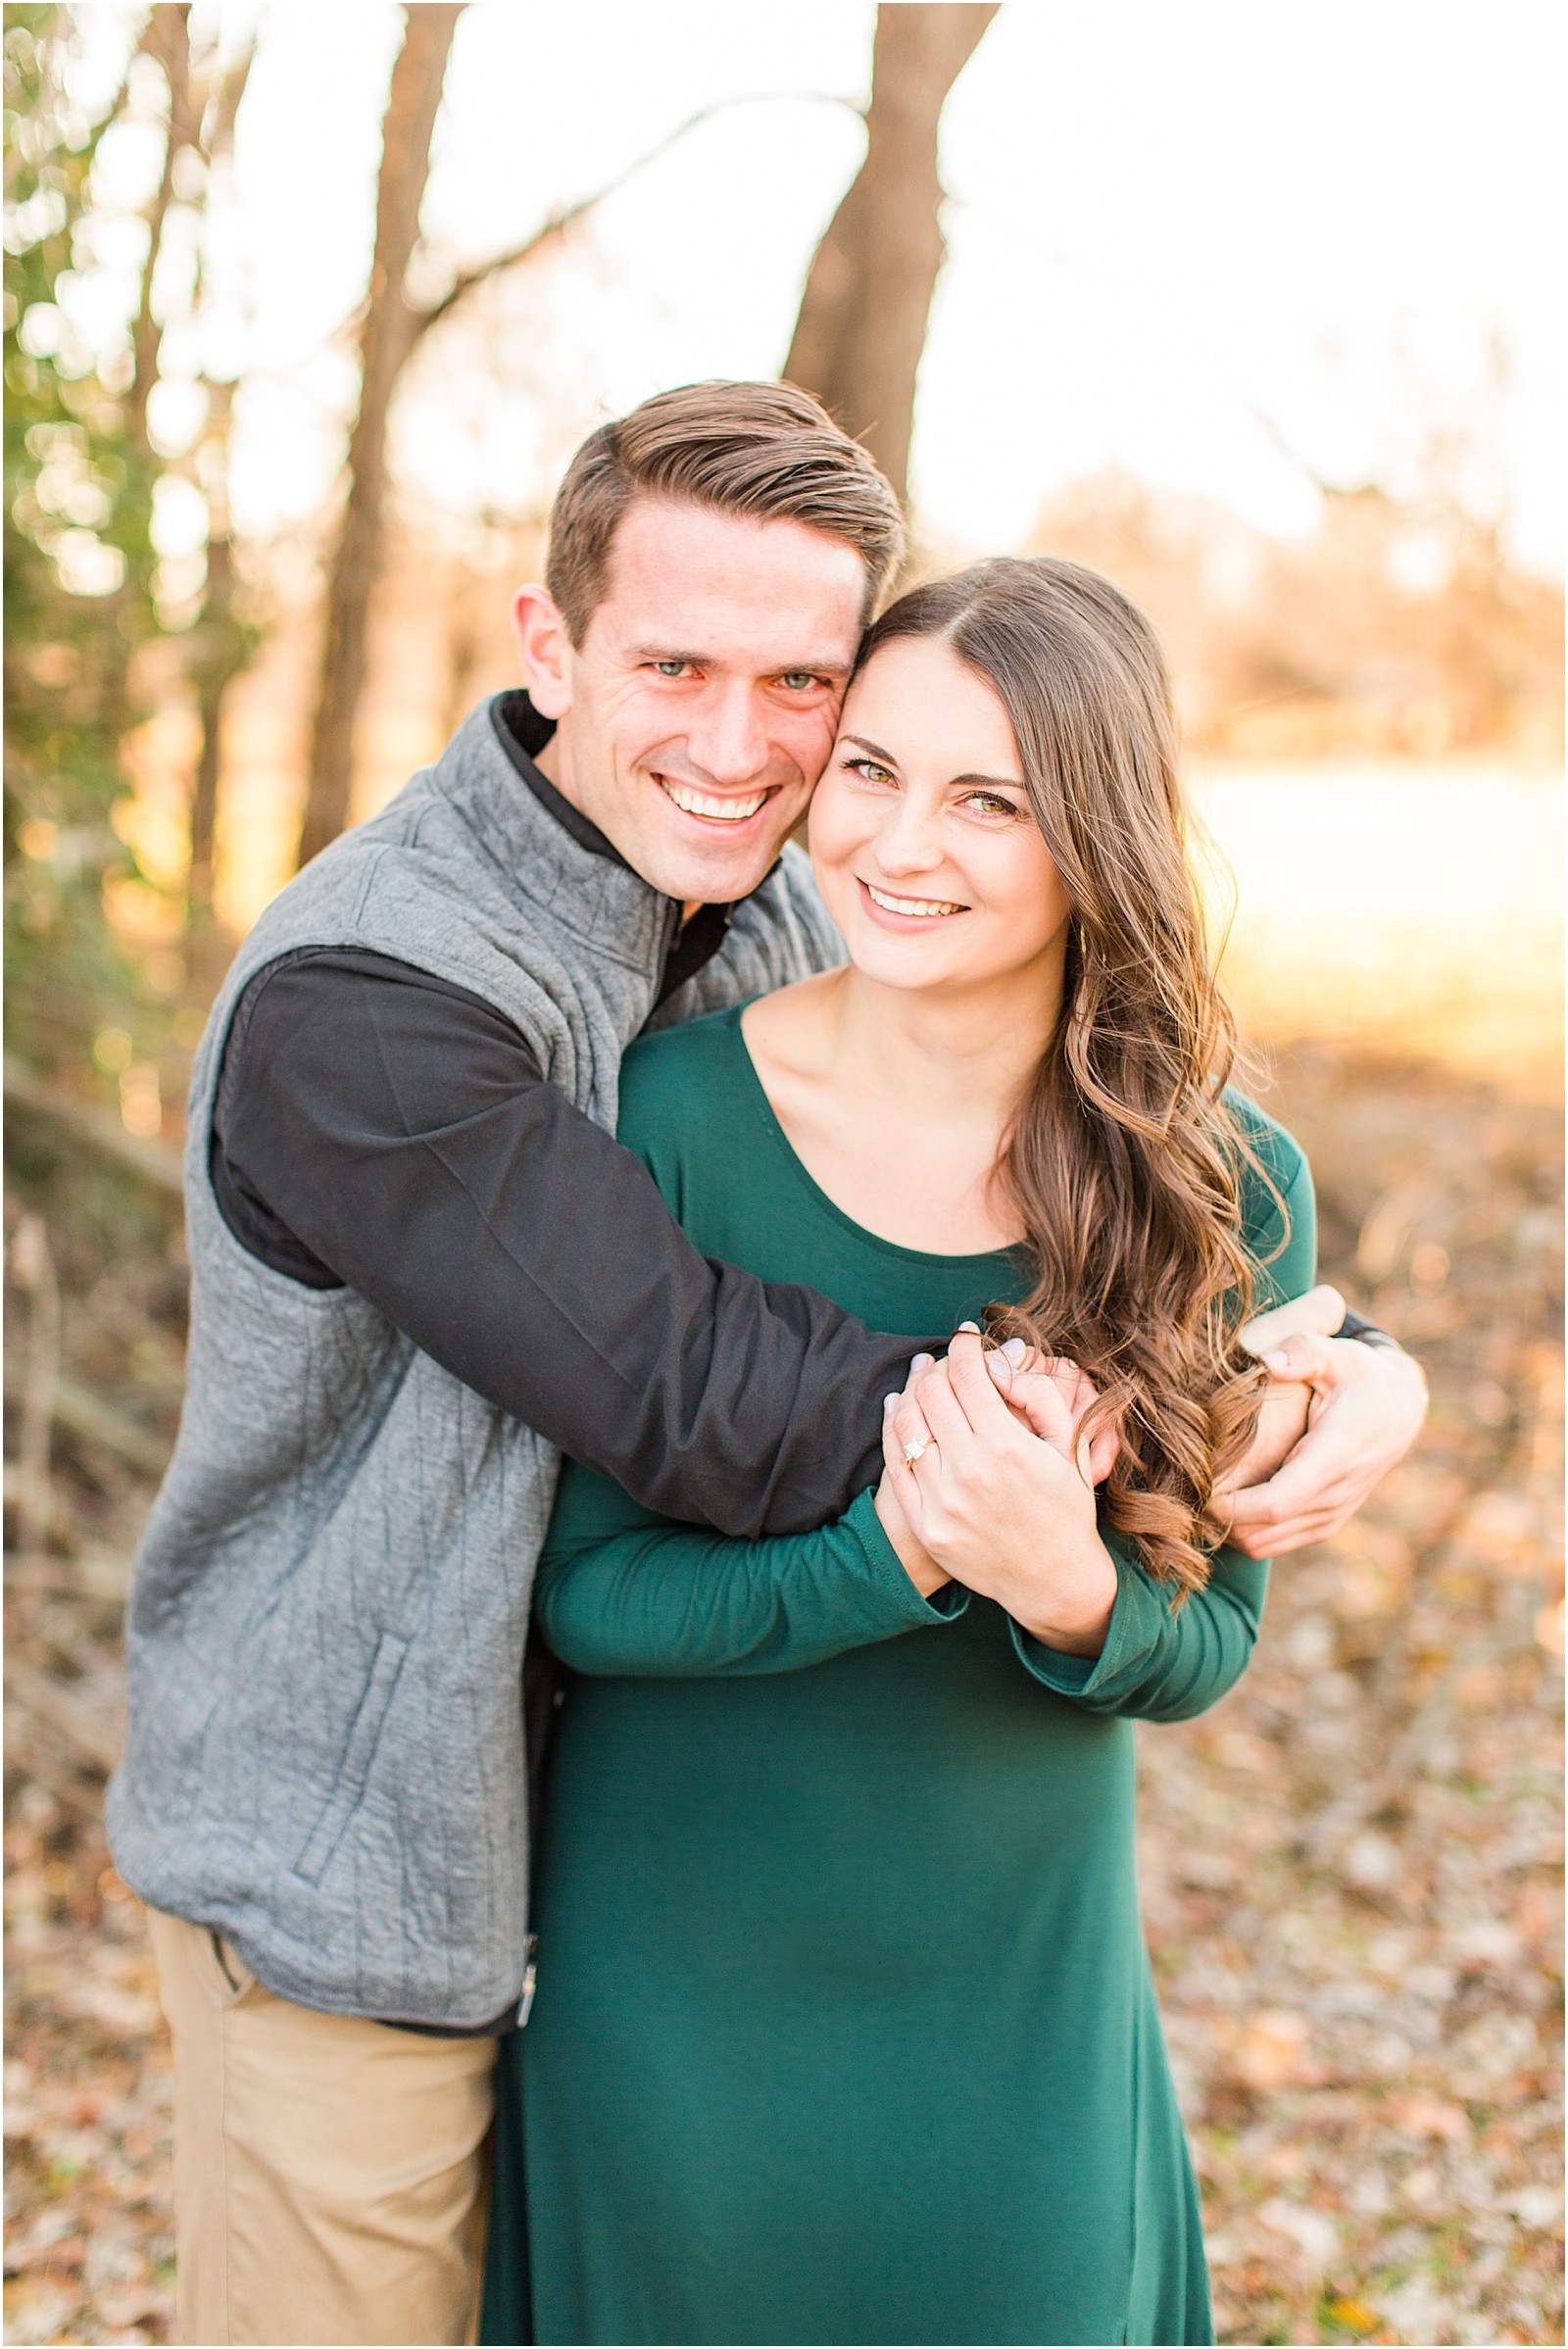 Kaley and Devon's fall Evansville Indiana engagement session. | #fallengagementsession #evansvilleindiana #evansvilleindianawedding | 0016.jpg